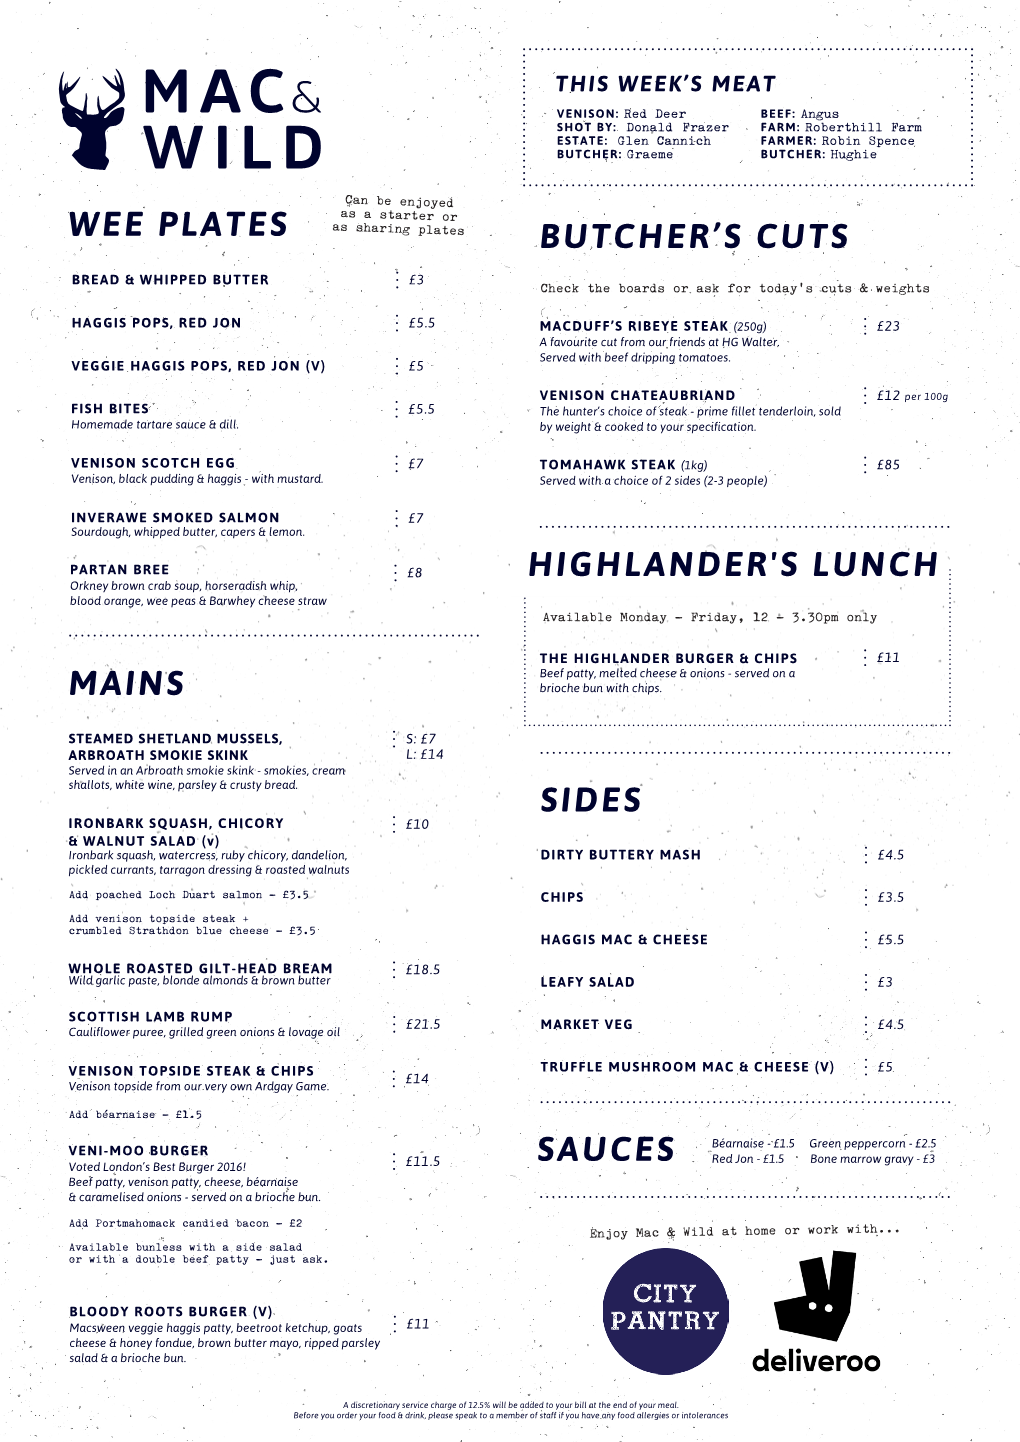 Mains Butcher's Cuts Sides Wee Plates Highlander's Lunch